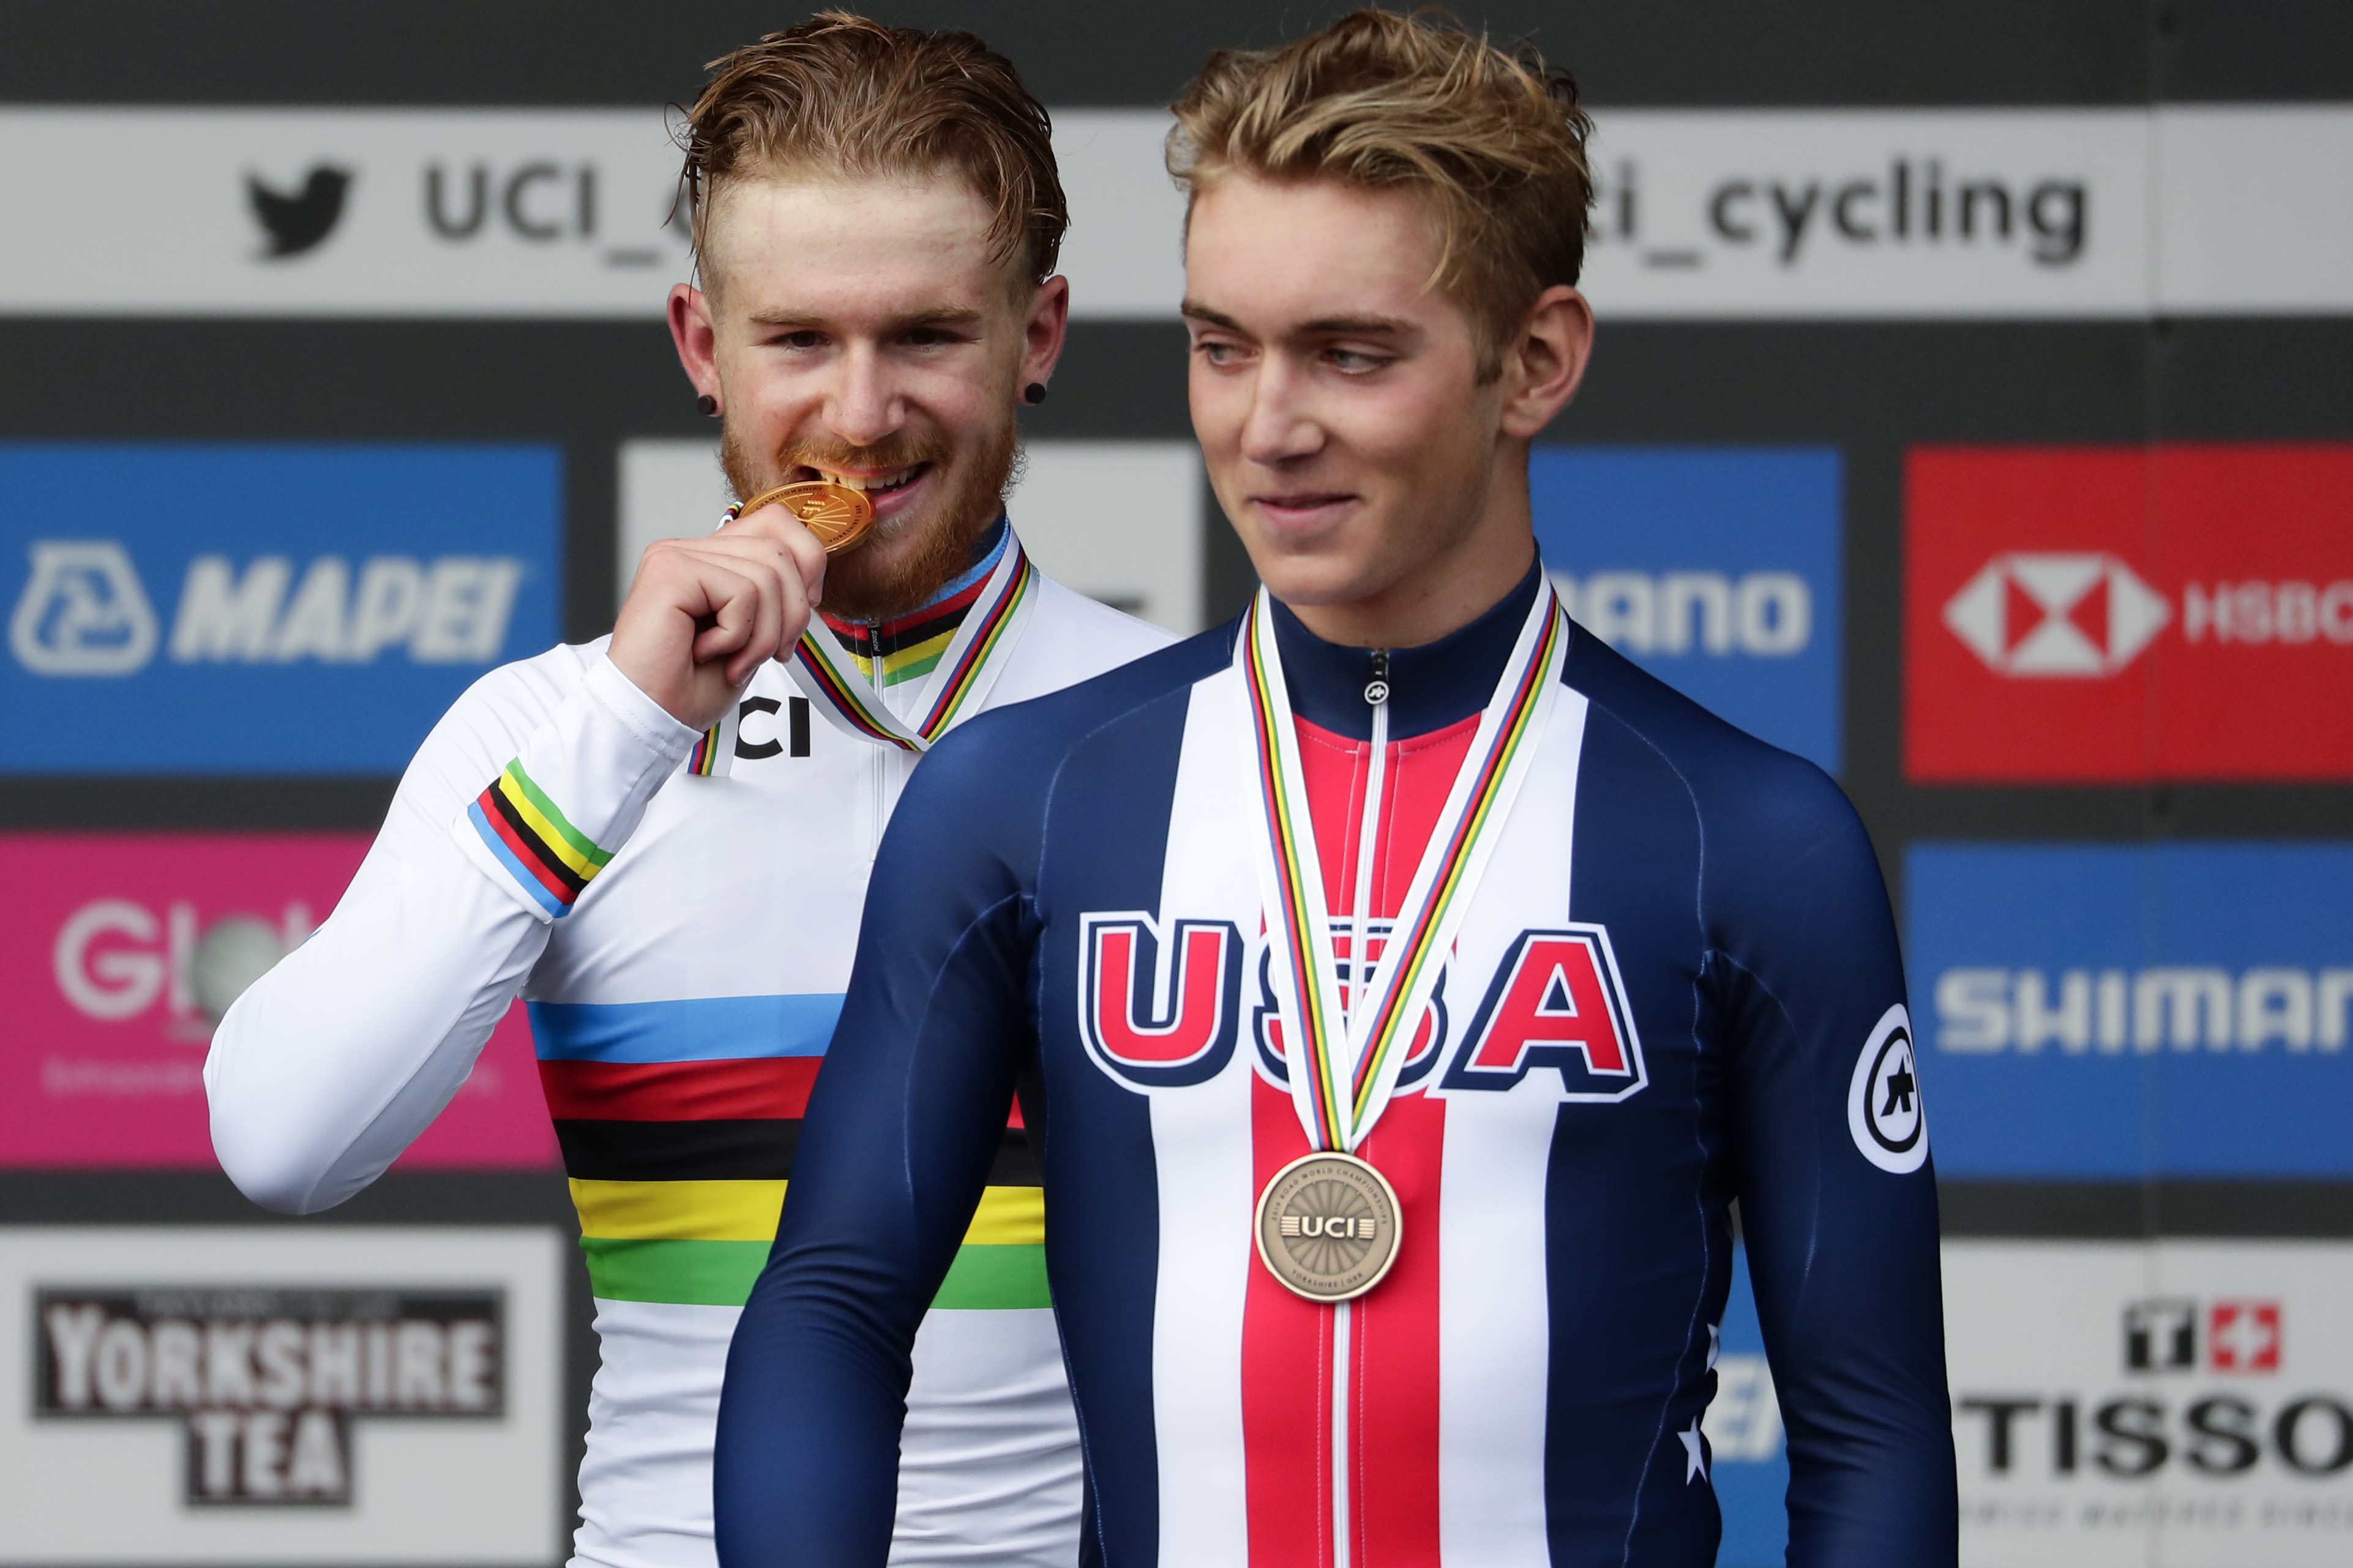 USA Cycling announces road race team for Paris that will try to end 40-year Olympic medal drought